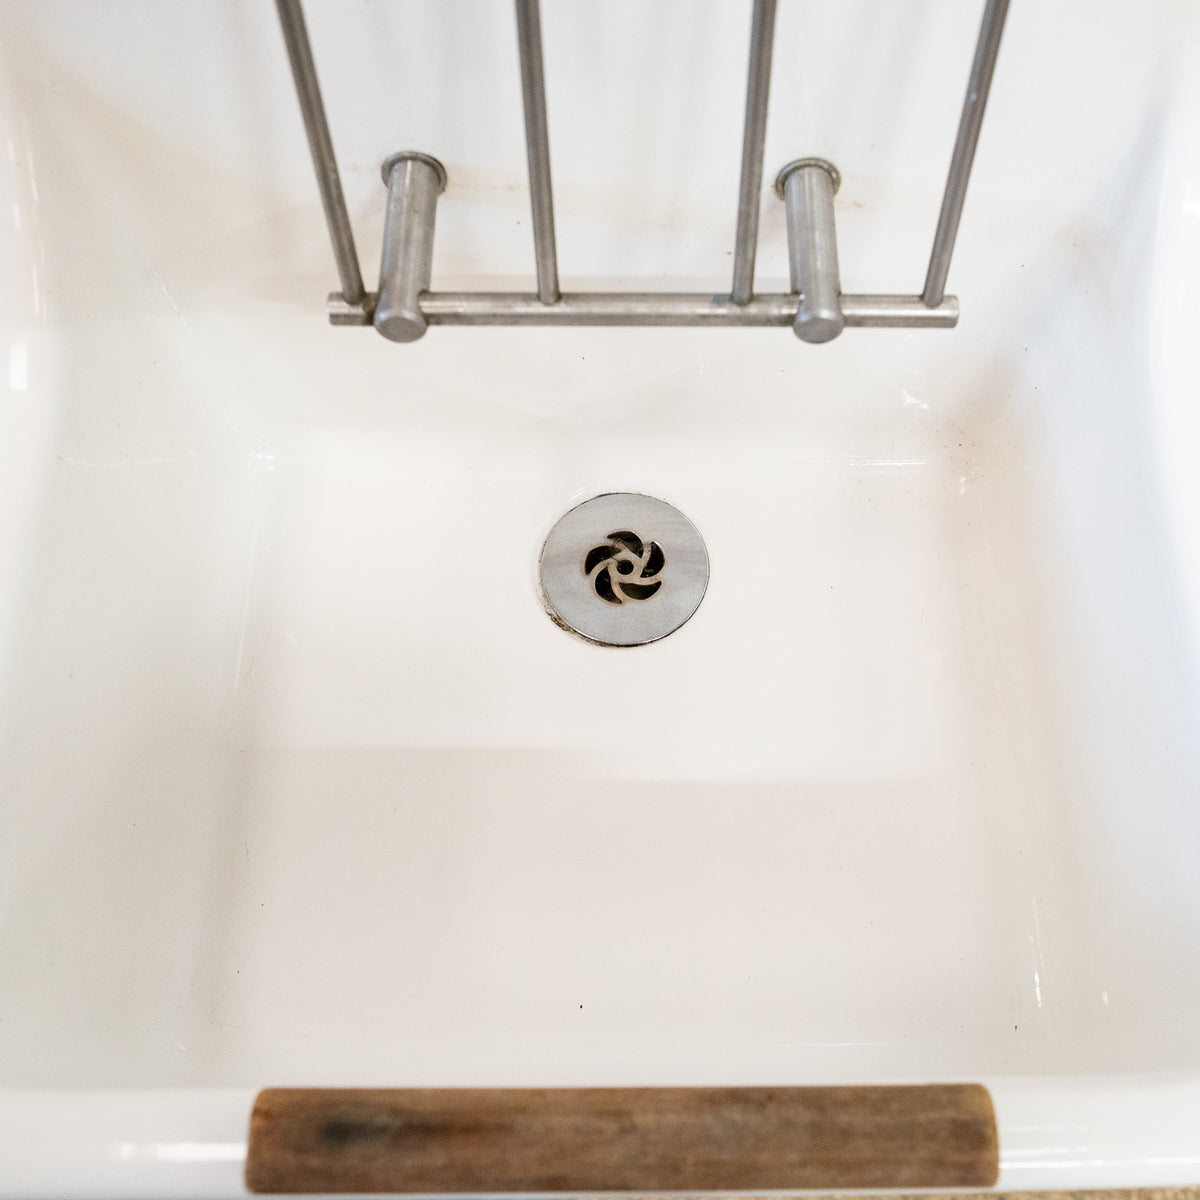 Reclaimed Twyford Ceramic Mop Sink | The Architectural Forum